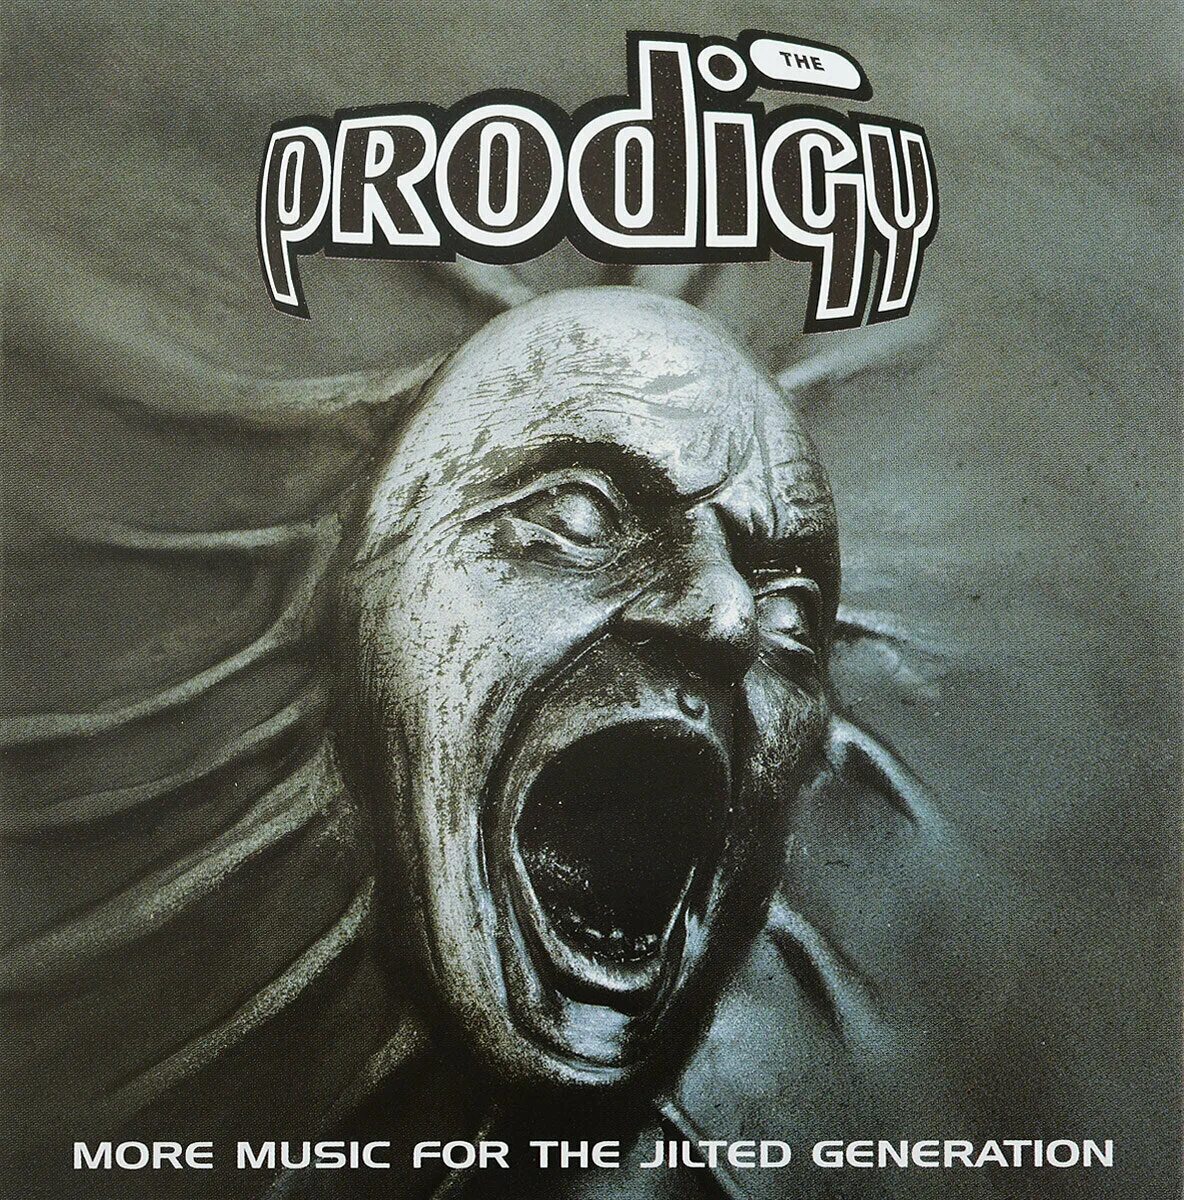 Music for the jilted generation. The Prodigy Music for the jilted Generation 1994. Prodigy обложка. More Music for the jilted Generation the Prodigy. Prodigy альбомы.